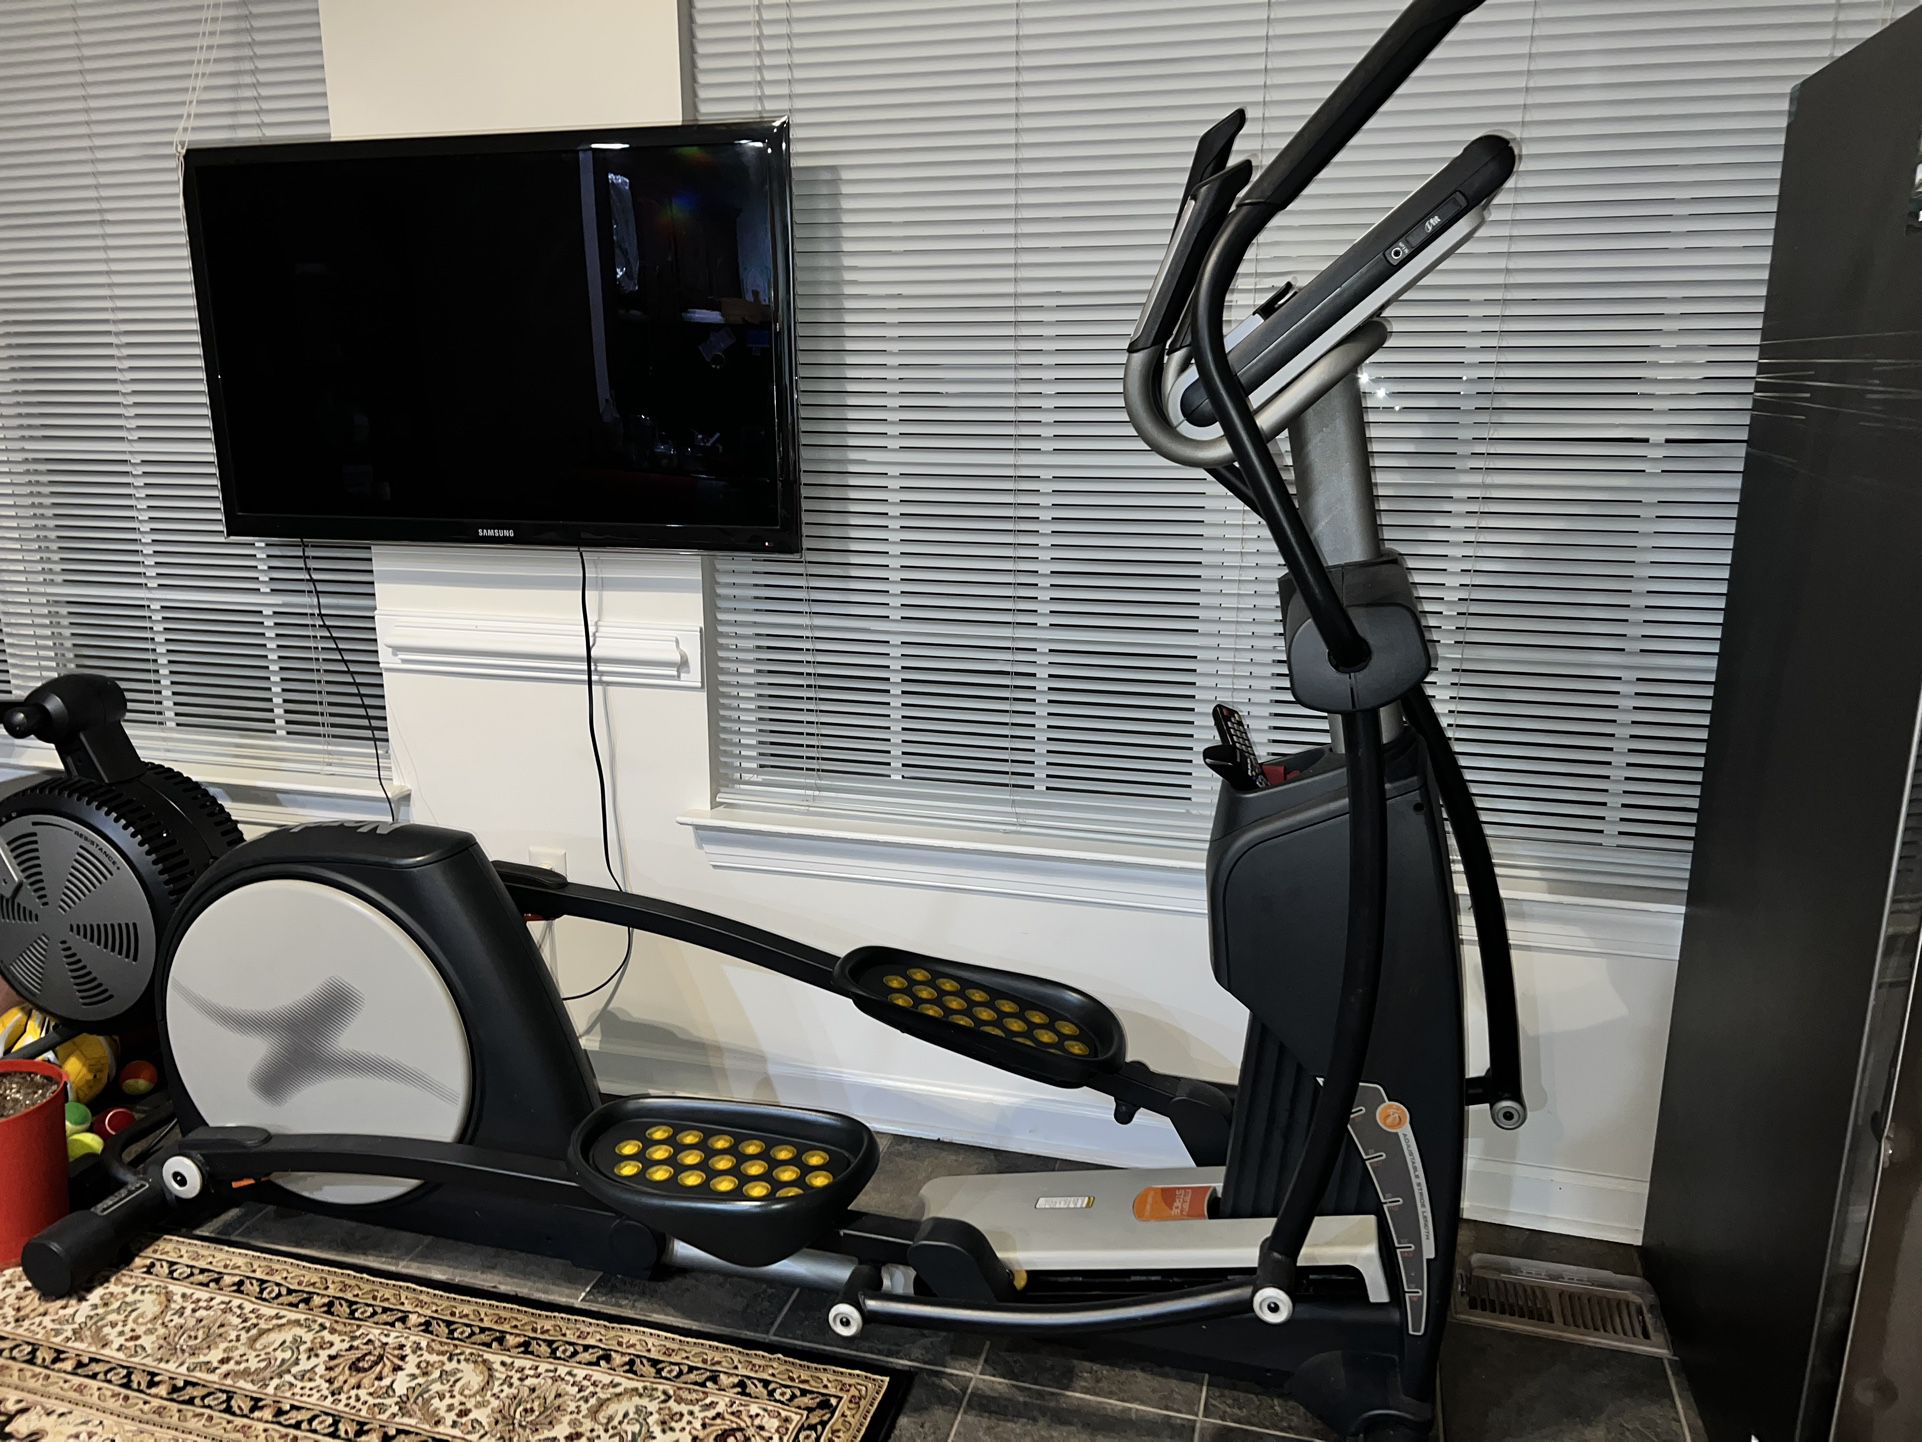 NordicTrack Elliptical Barely Used Excellent Condition  